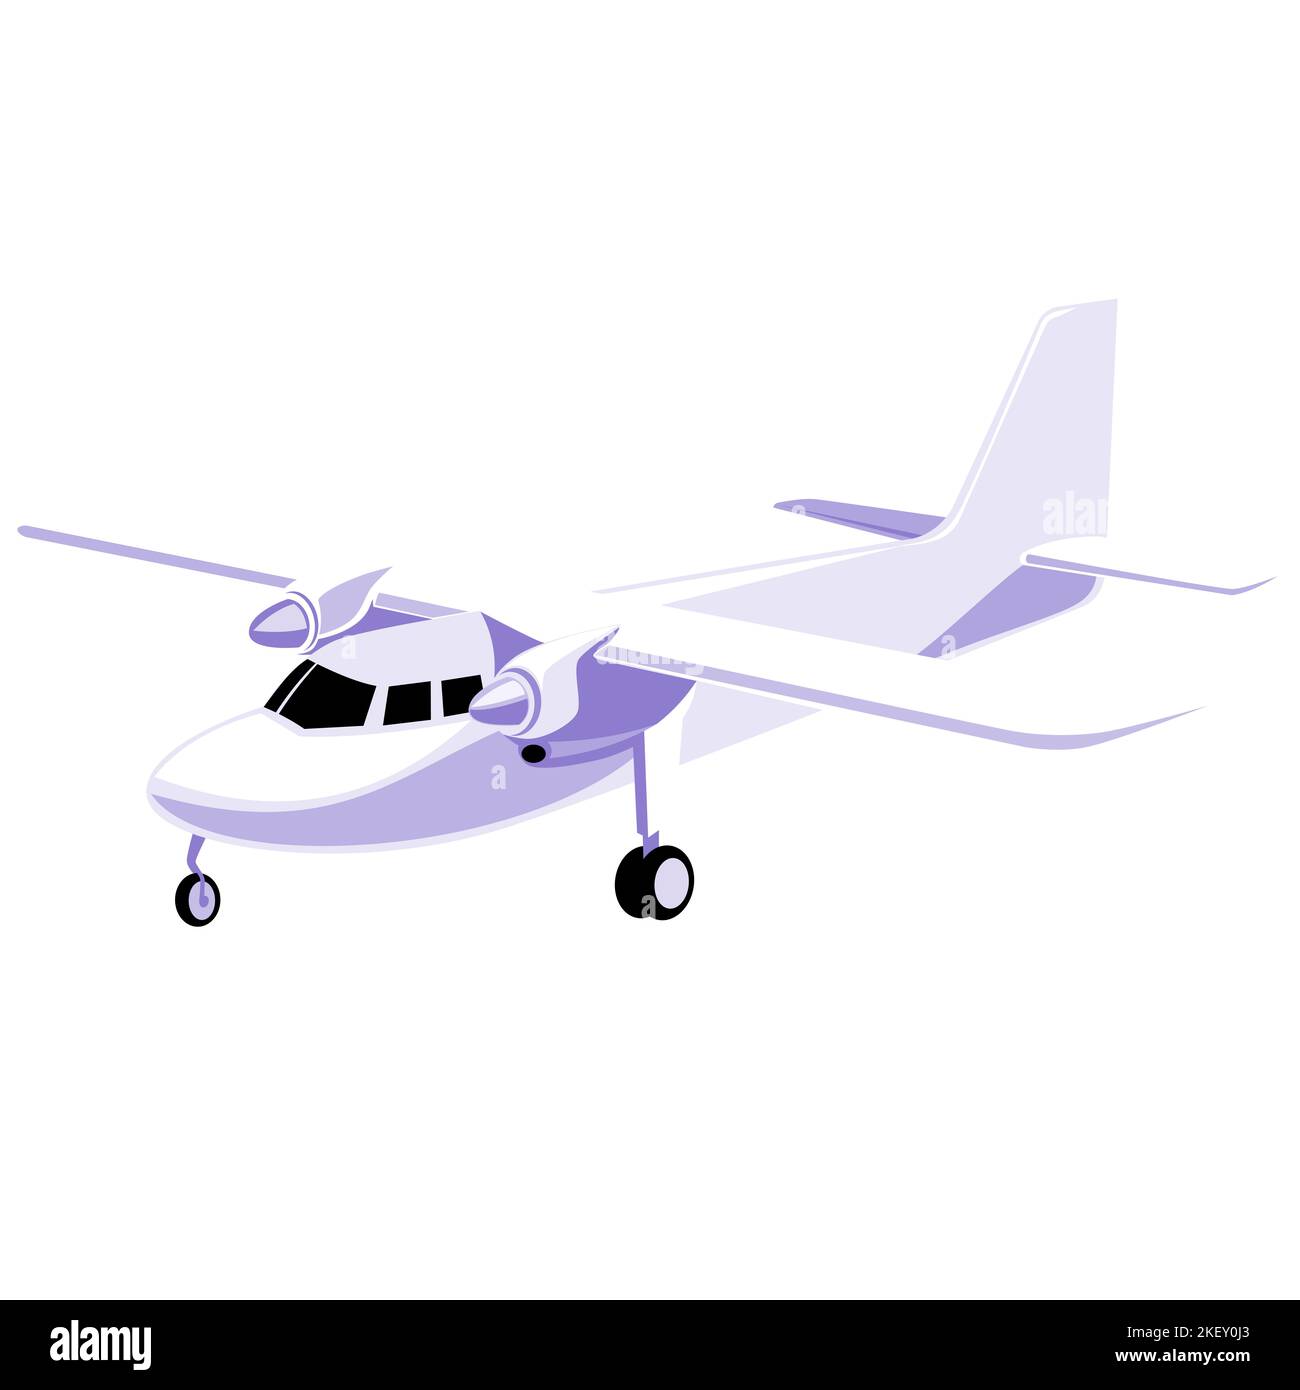 Illustration of a propeller plane airplane airliner on full flight flying viewed from side  isolated background done in retro style. Stock Photo